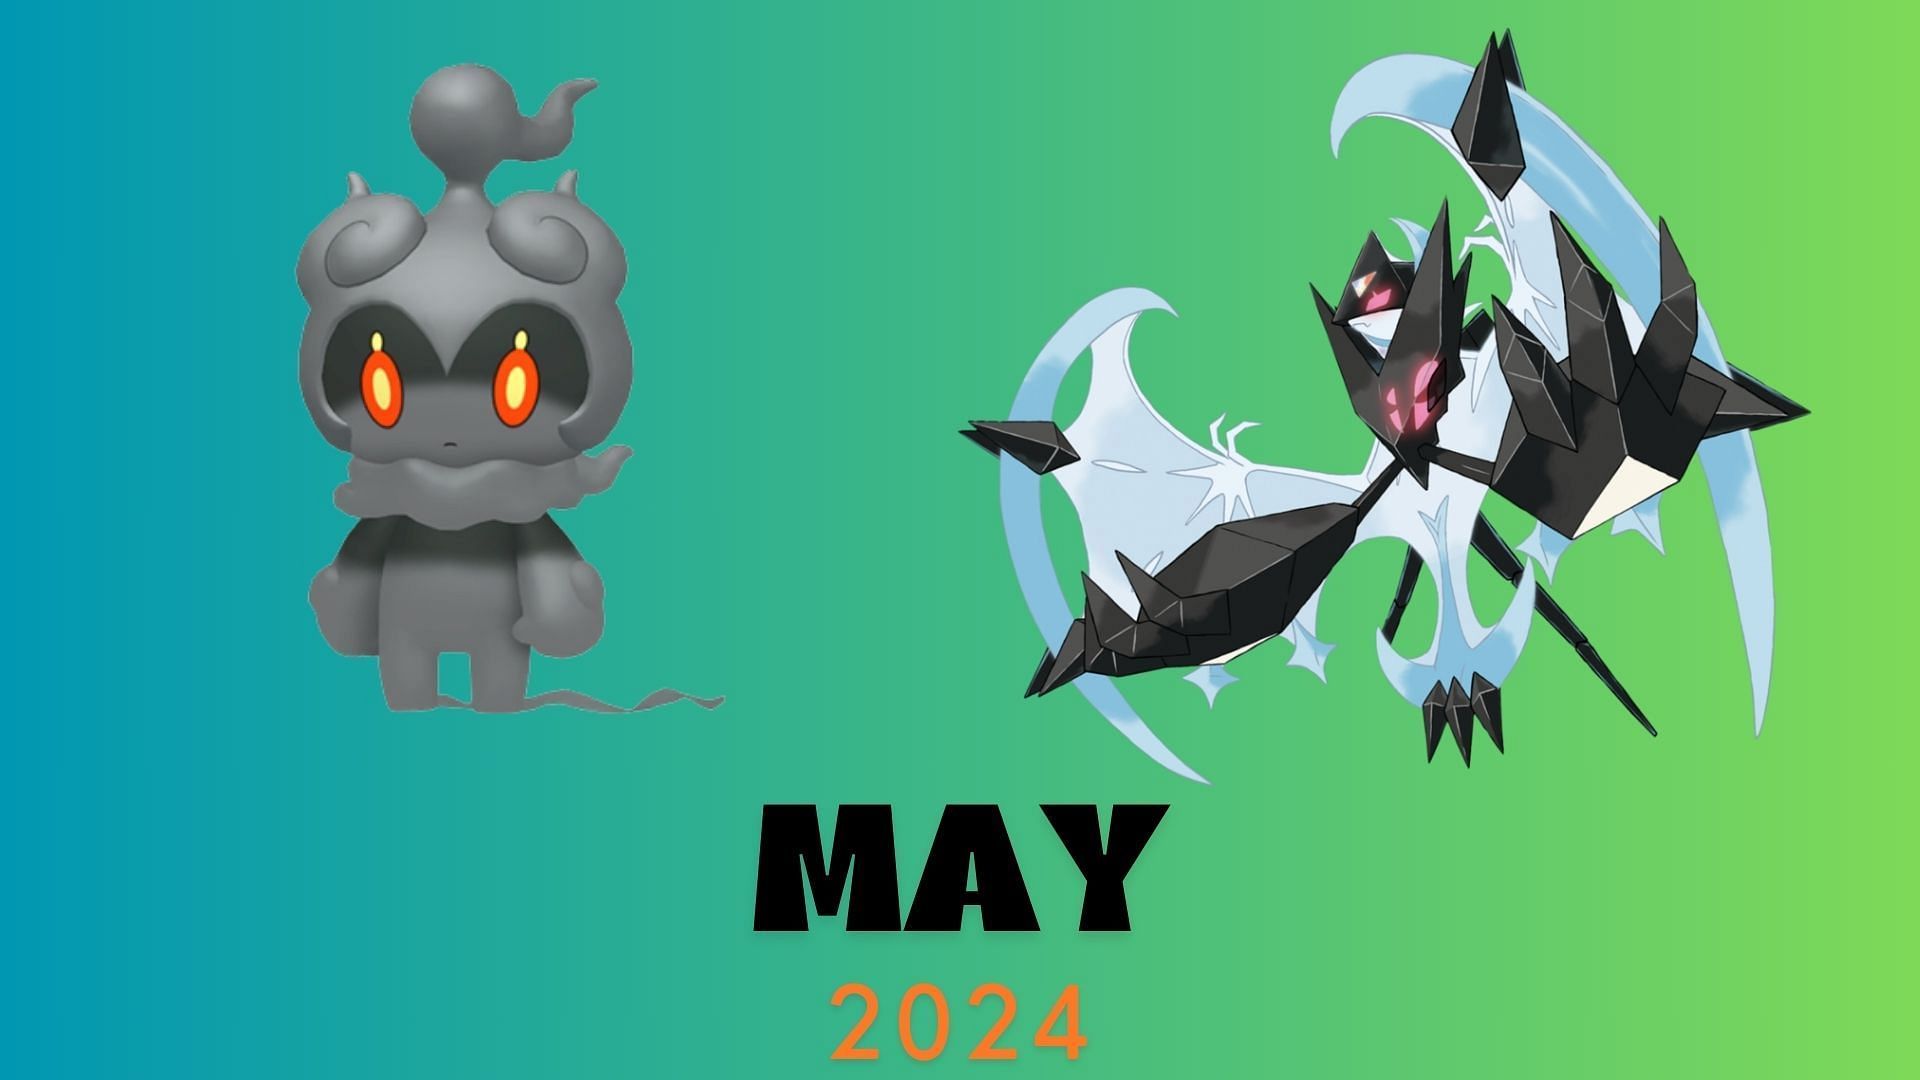 5 things to look forward to in Pokemon GO in May 2024